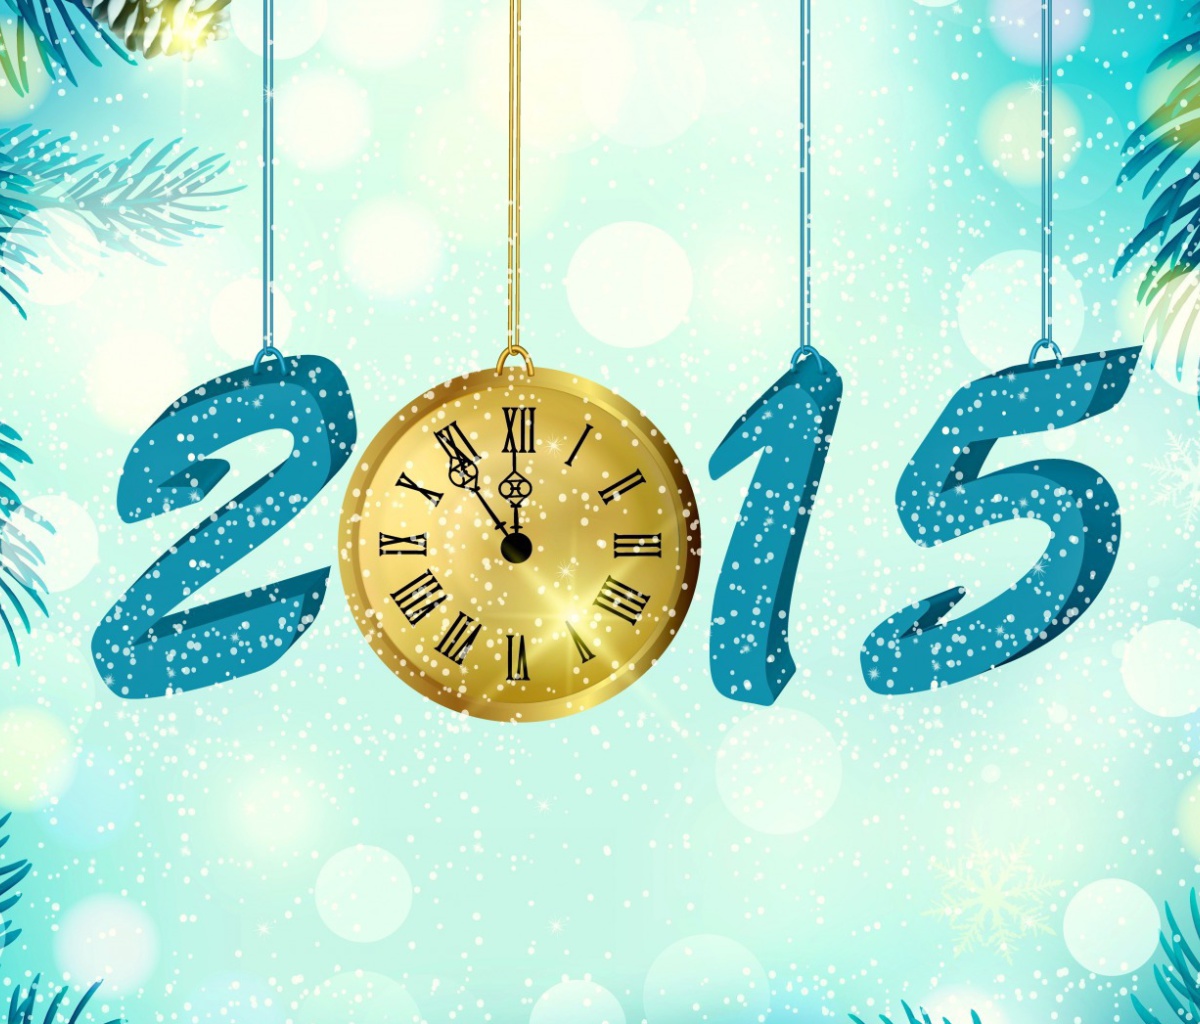 Happy New Year 2015 with Clock wallpaper 1200x1024